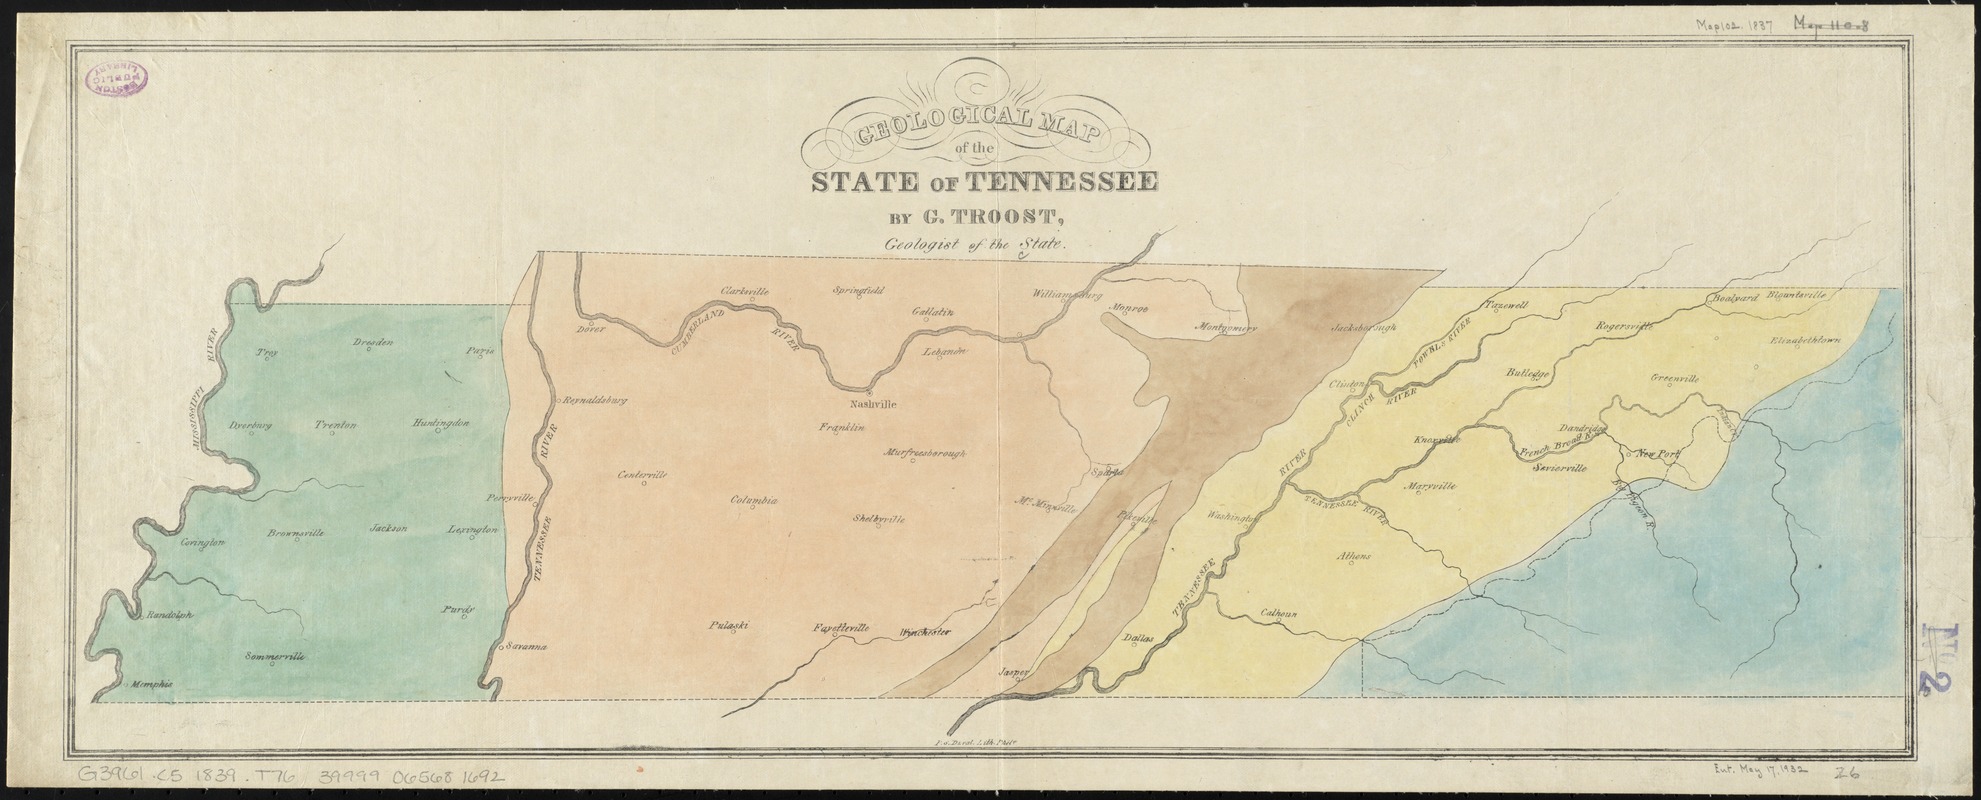 Geological map of the state of Tennessee